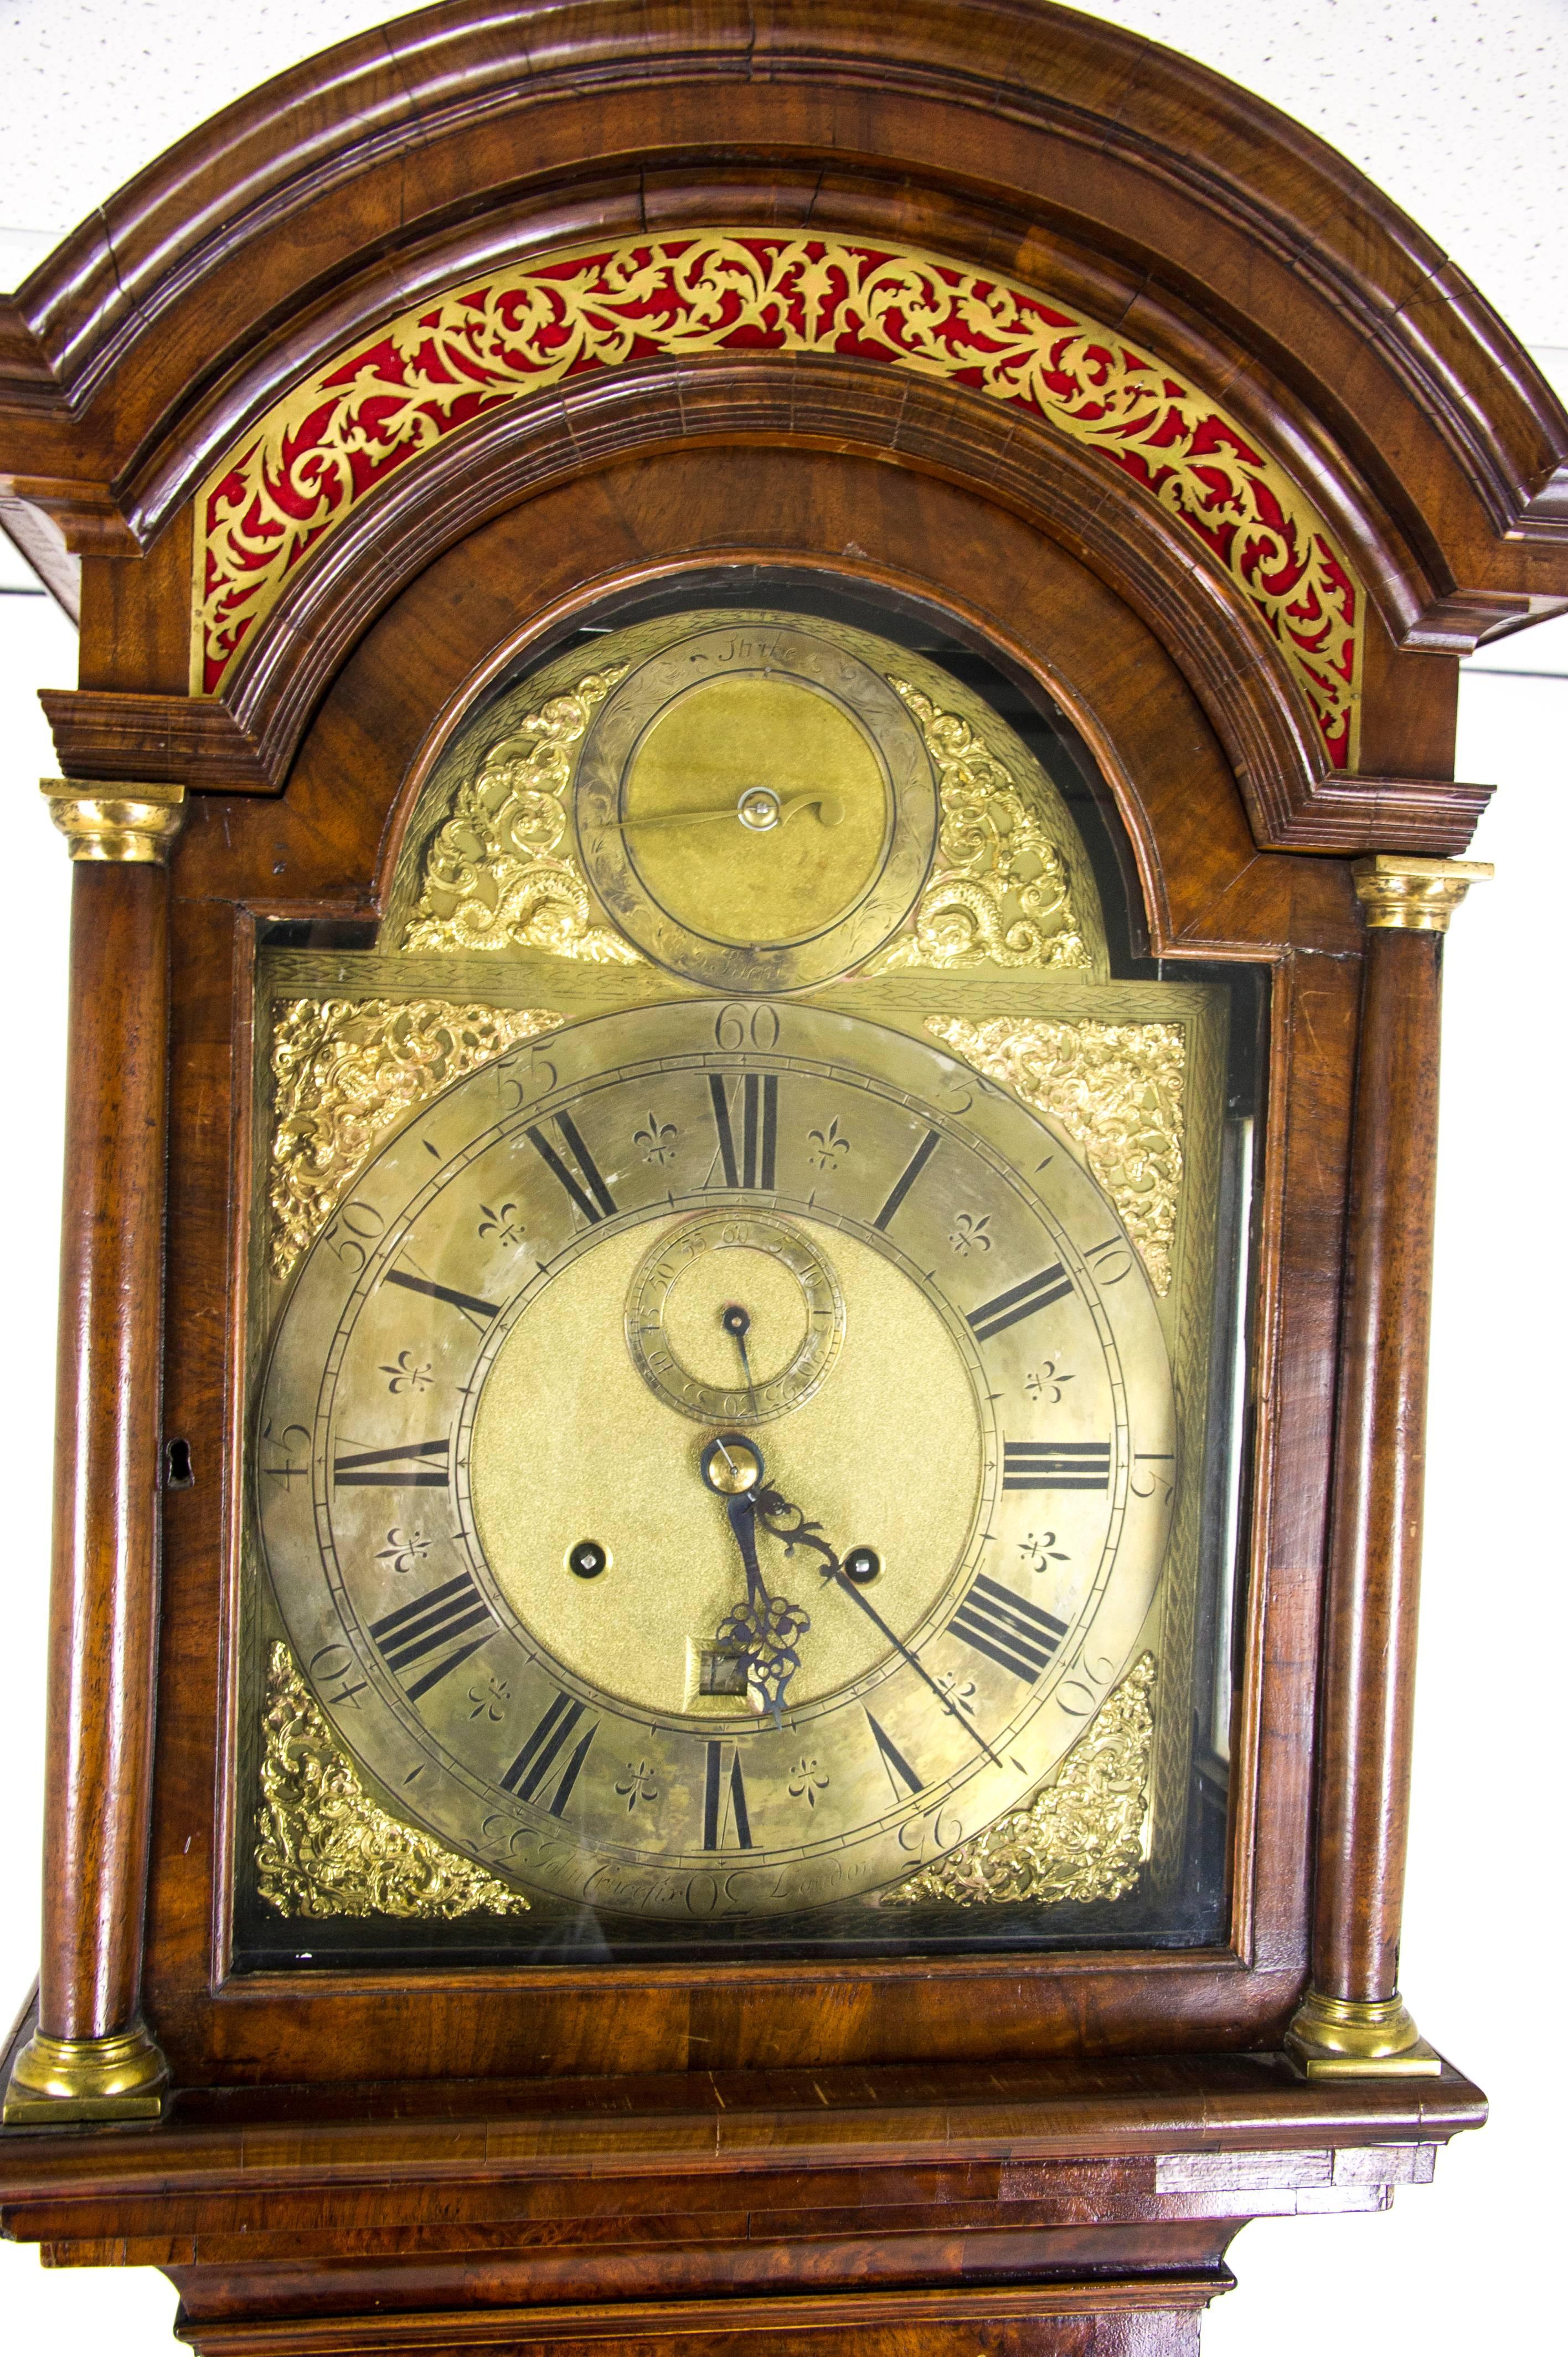 Antique grandfather clock John Crucefix of London, 1720 walnut long case clock.

England, 1715-1725.
Clean and well proportioned
Arched dome hood with a panel of brass fretwork and fixed pillars
With anchor escapement and strike on a